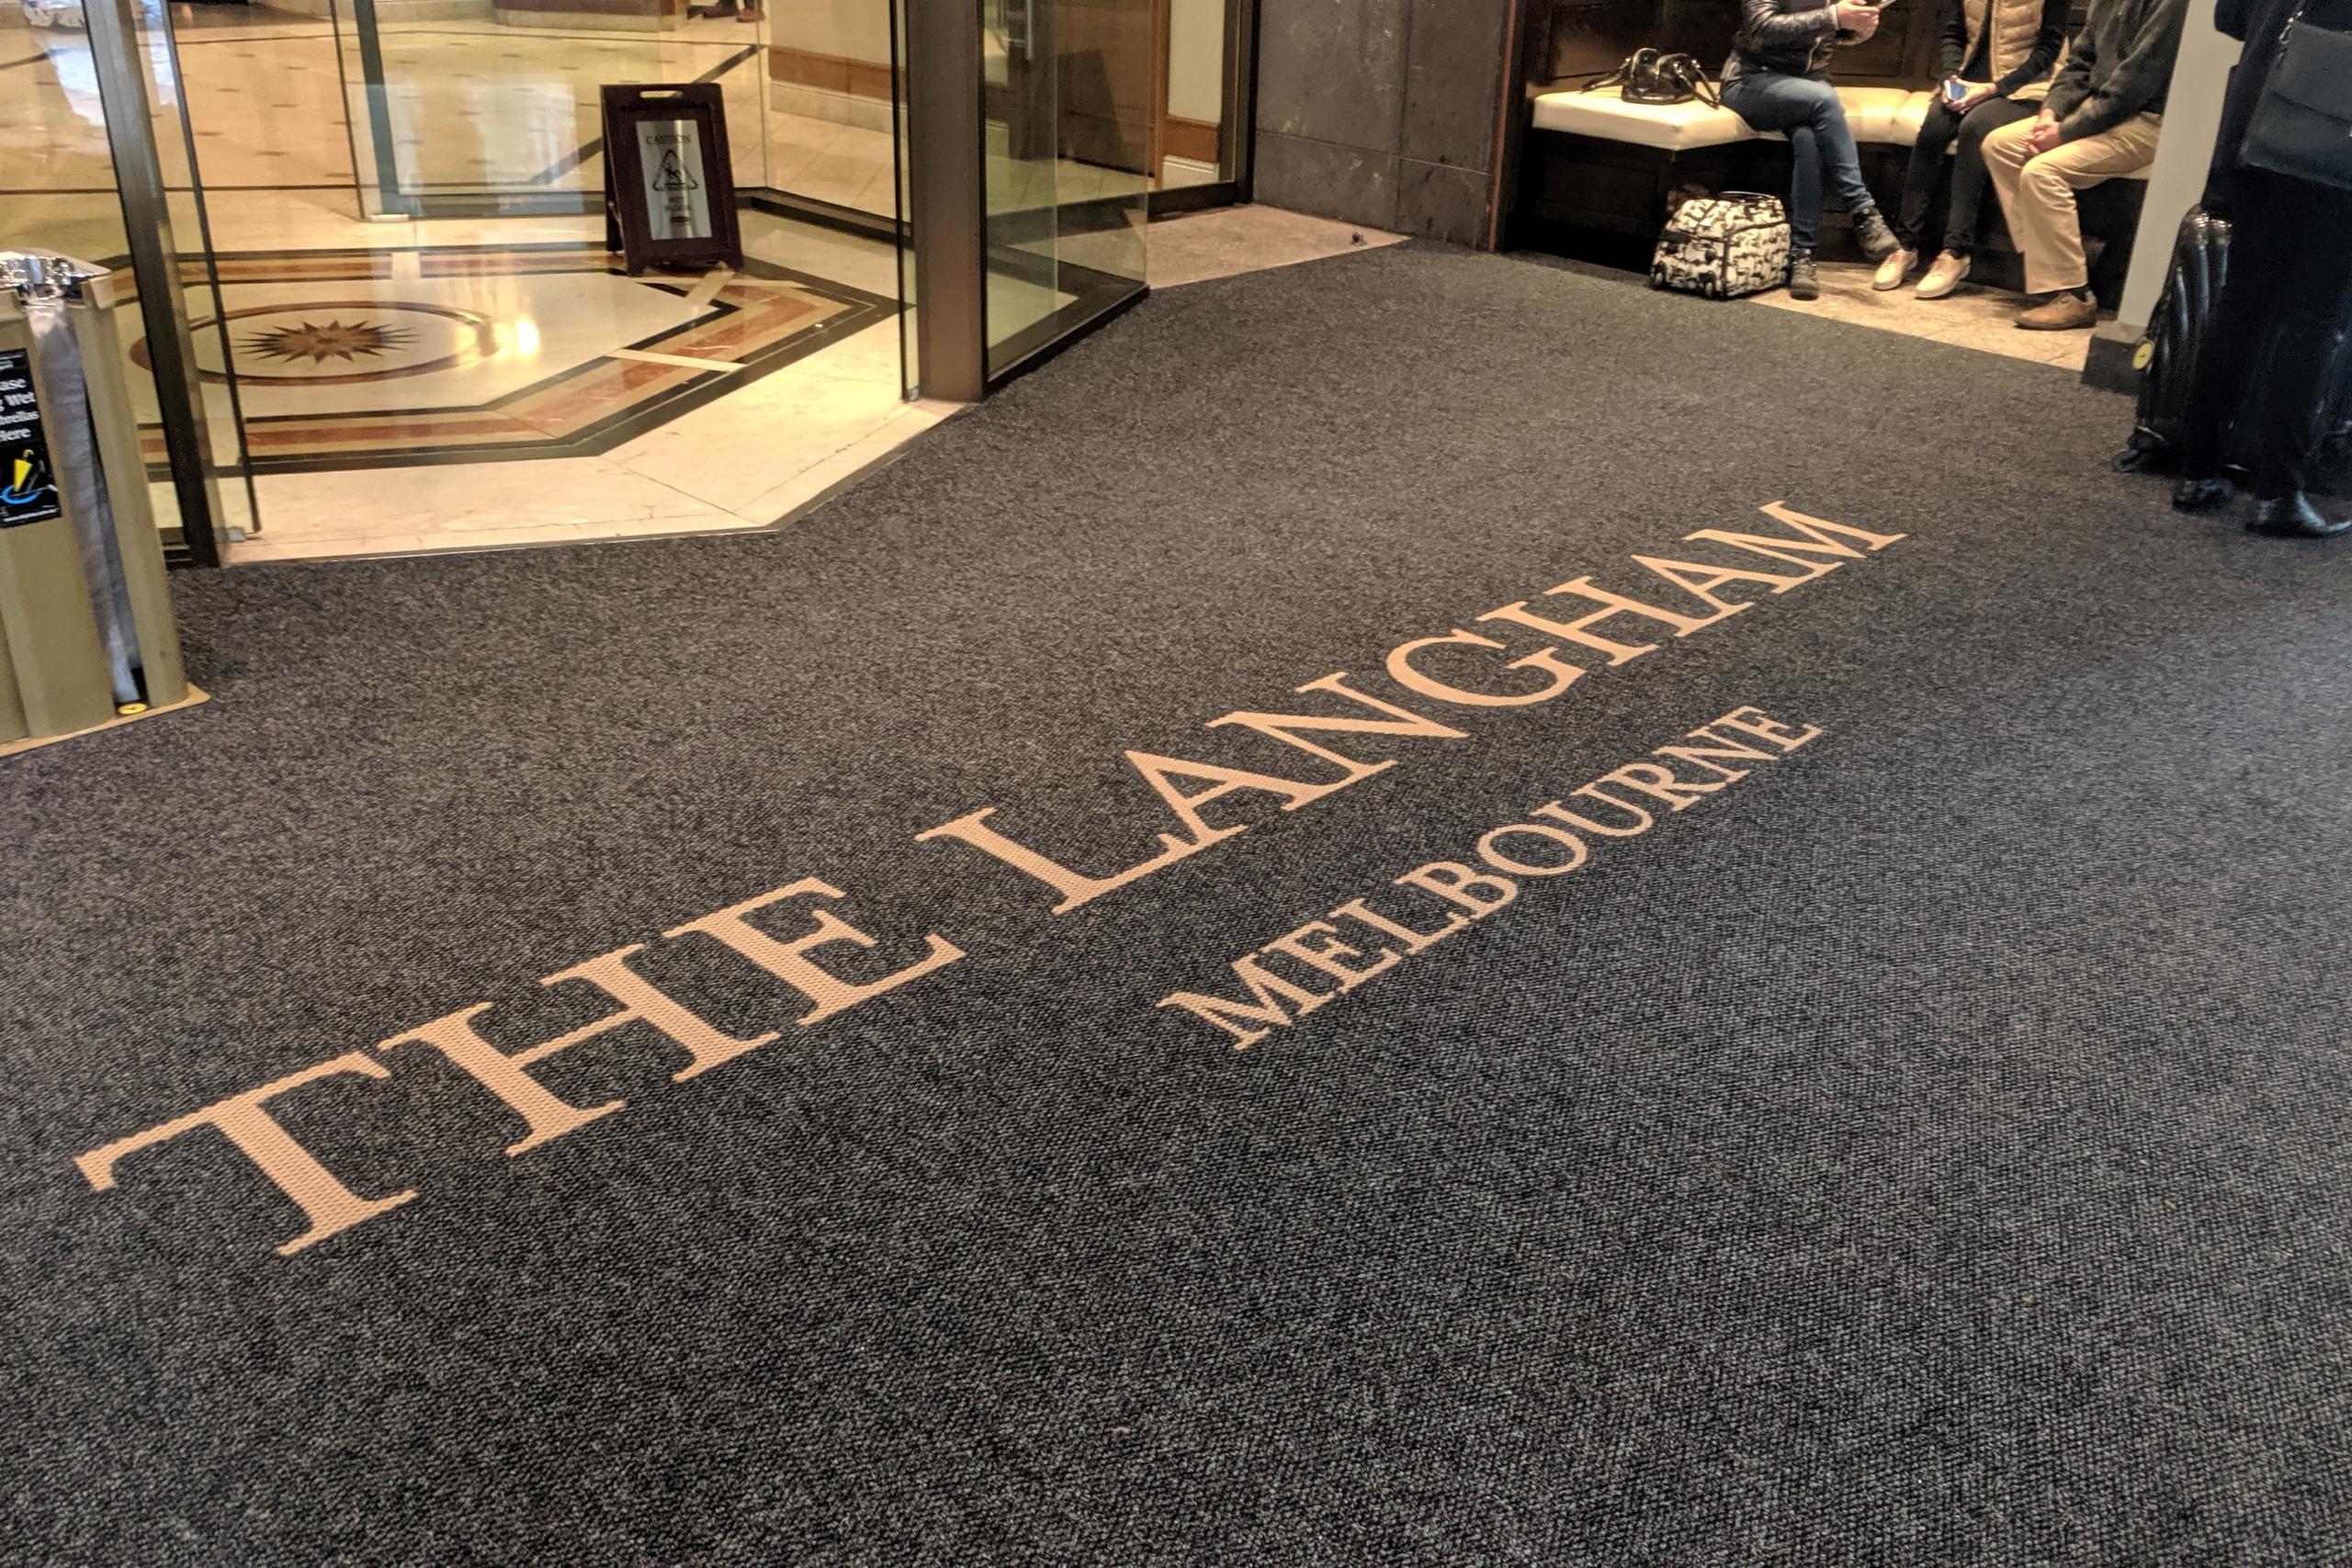 The entrance to The Langham Melbourne is shown with a round doorway and a large entrance mat. The mat is printed with the name of the hotel in gold letters. A group of people are sitting in a cove to the right of the mat.